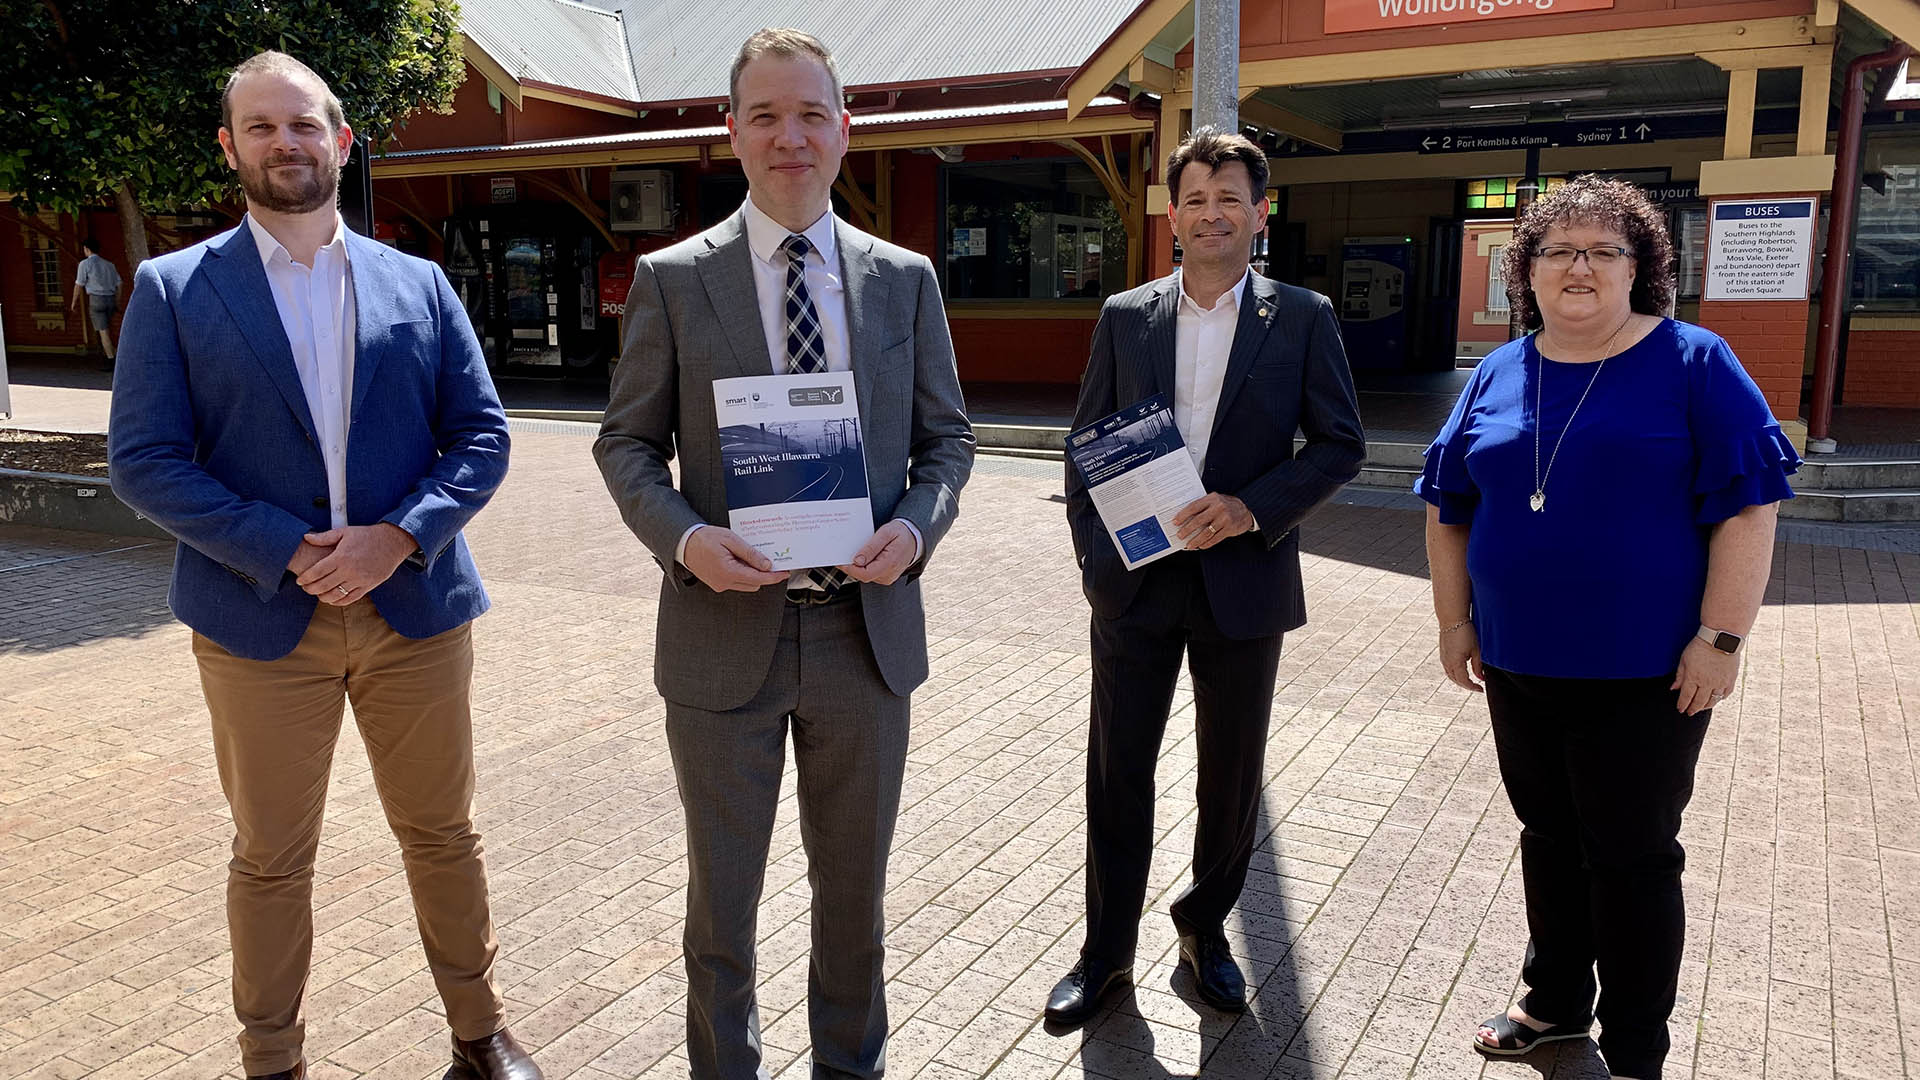 Illawarra Business Chamber Policy Manager James Newton, Illawarra Business Chamber Executive Director Adam Zarth, SMART Director Senior Professor Pascal Perez, SMART Chief Operating Officer Tania Brown